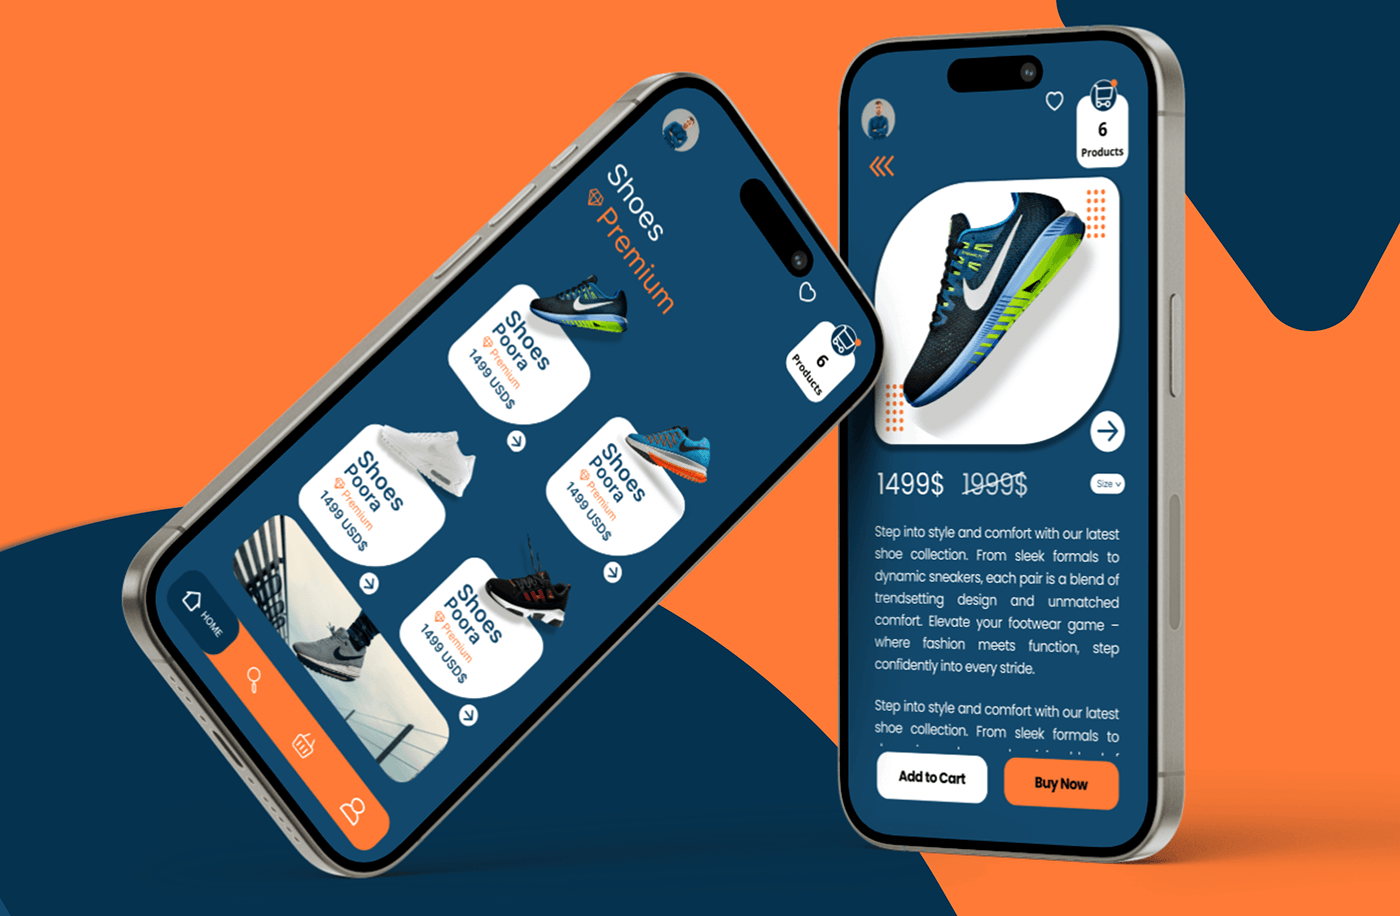 shoes shop identity UI/UX Figma user interface app design mobile Shoes store shoesdesign